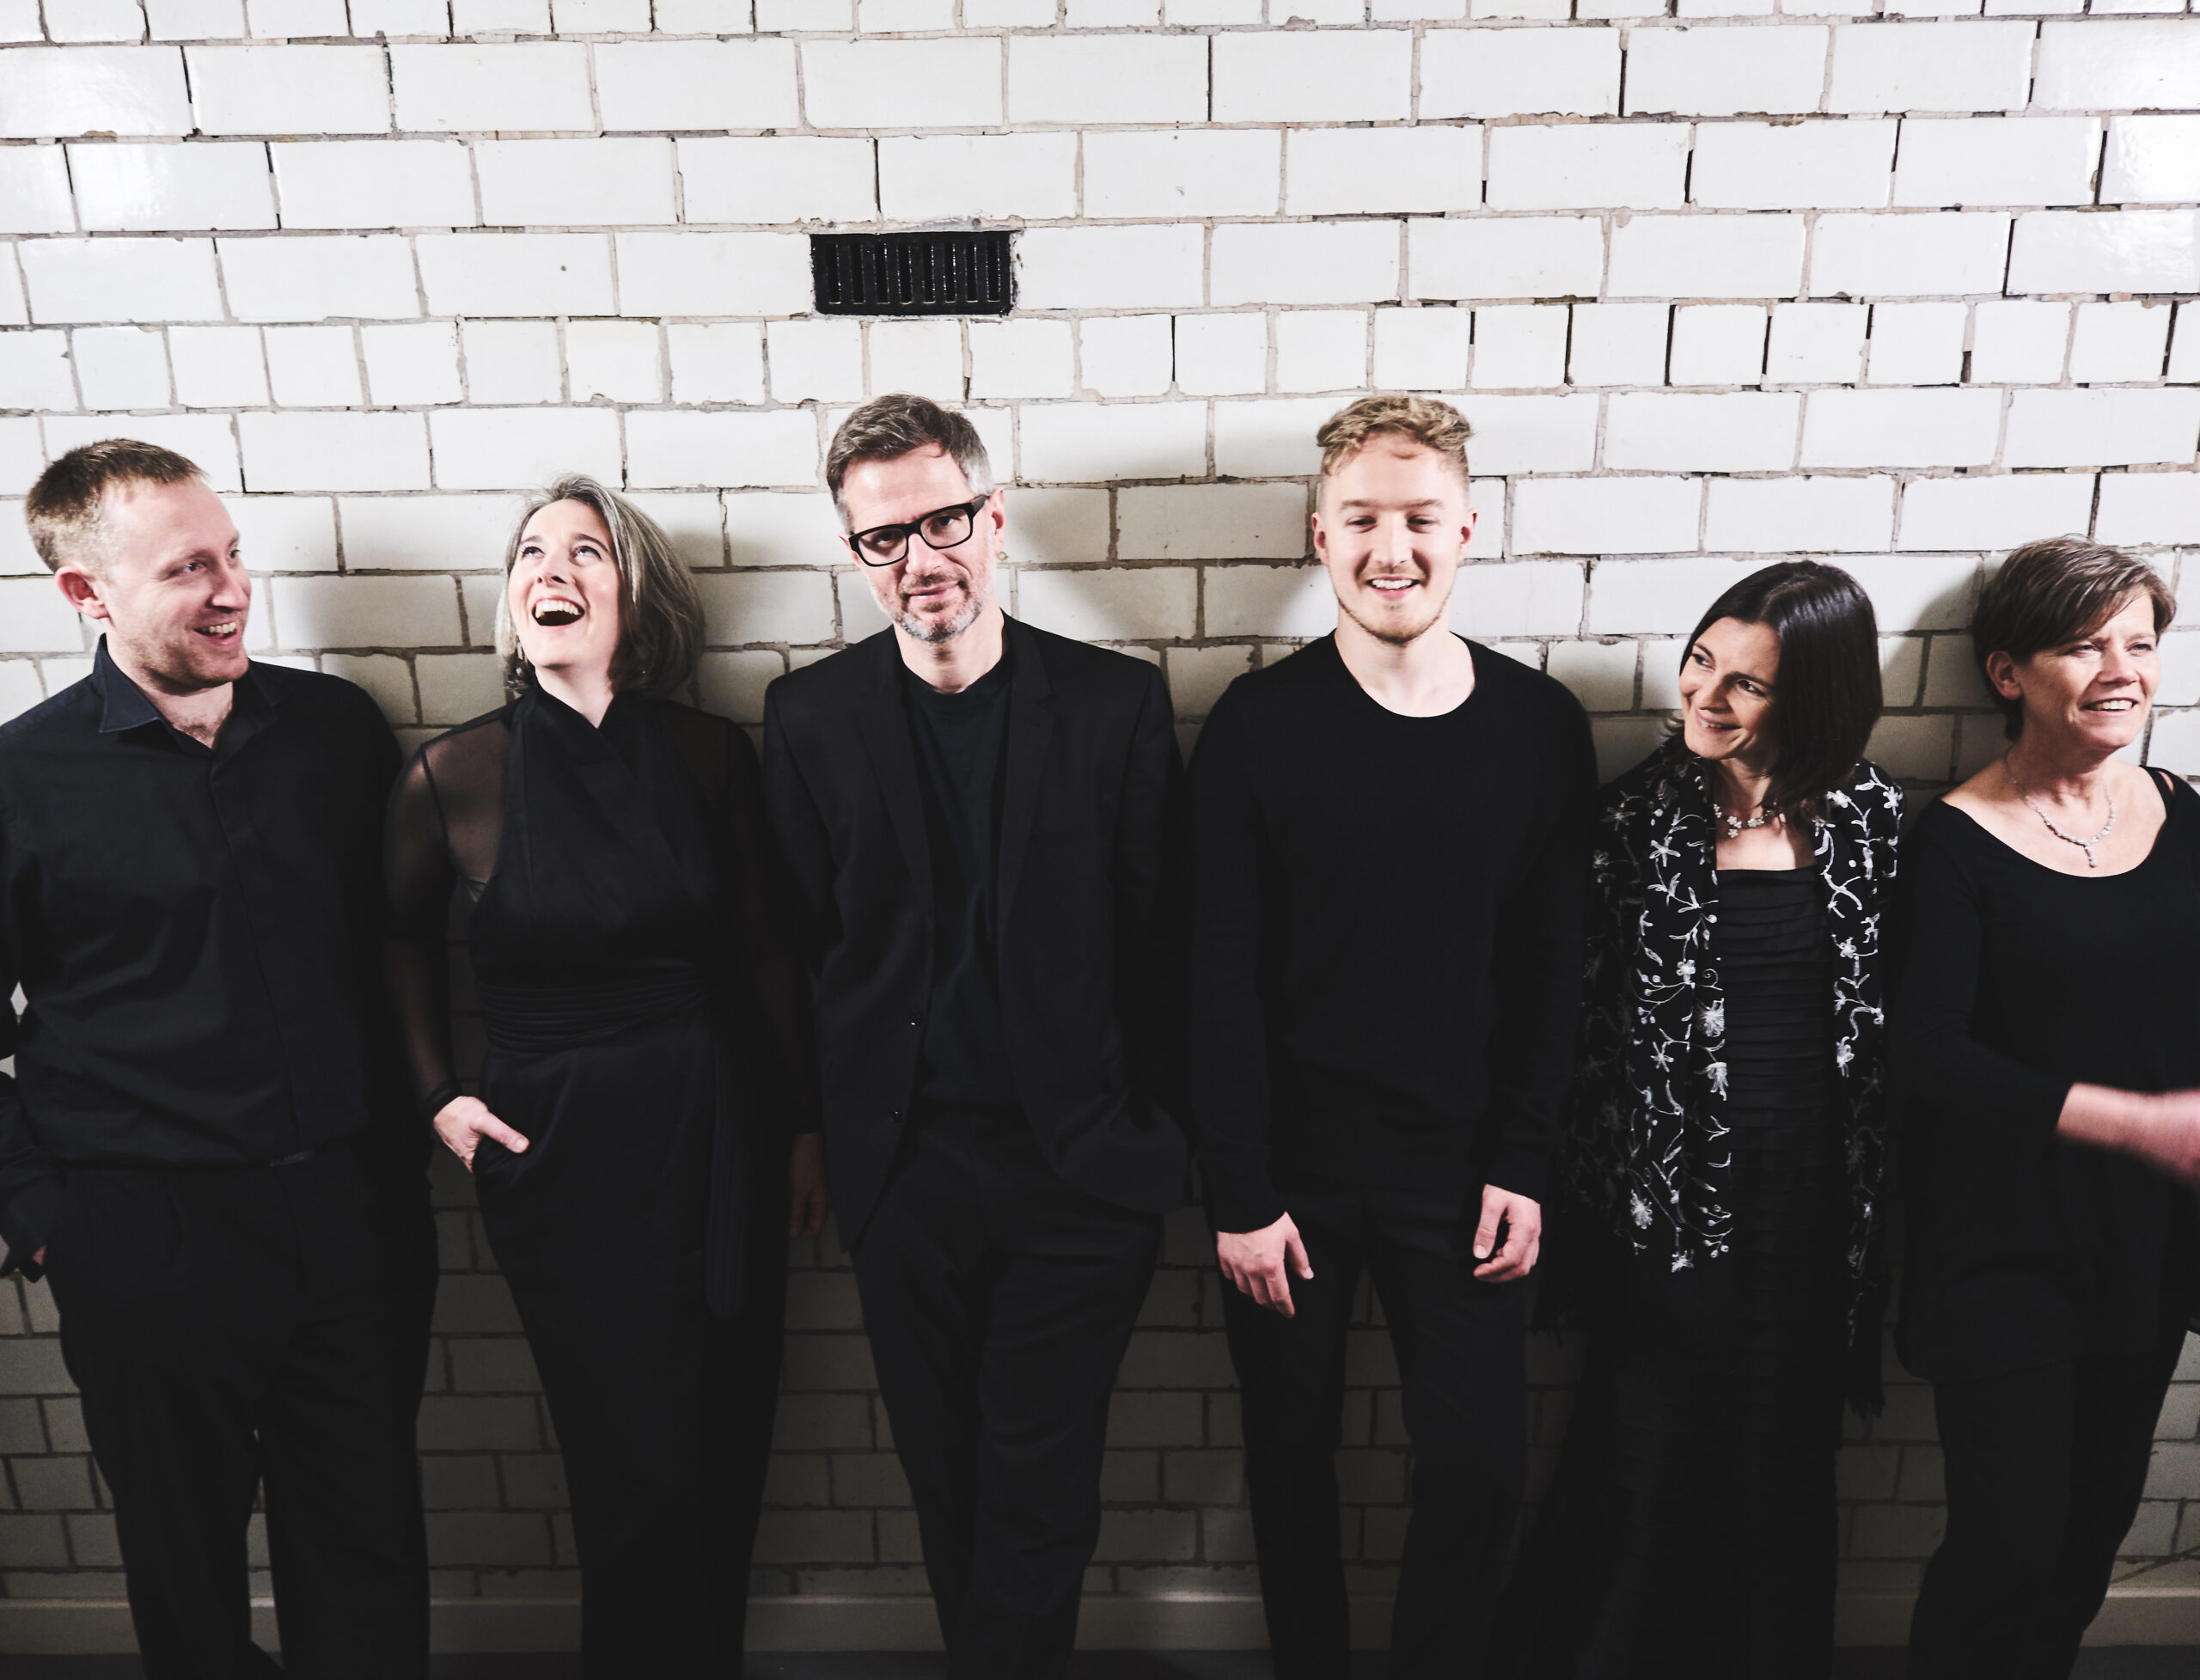 Six ensemble musicians looking relaxed against a faded white brick tiled wall.